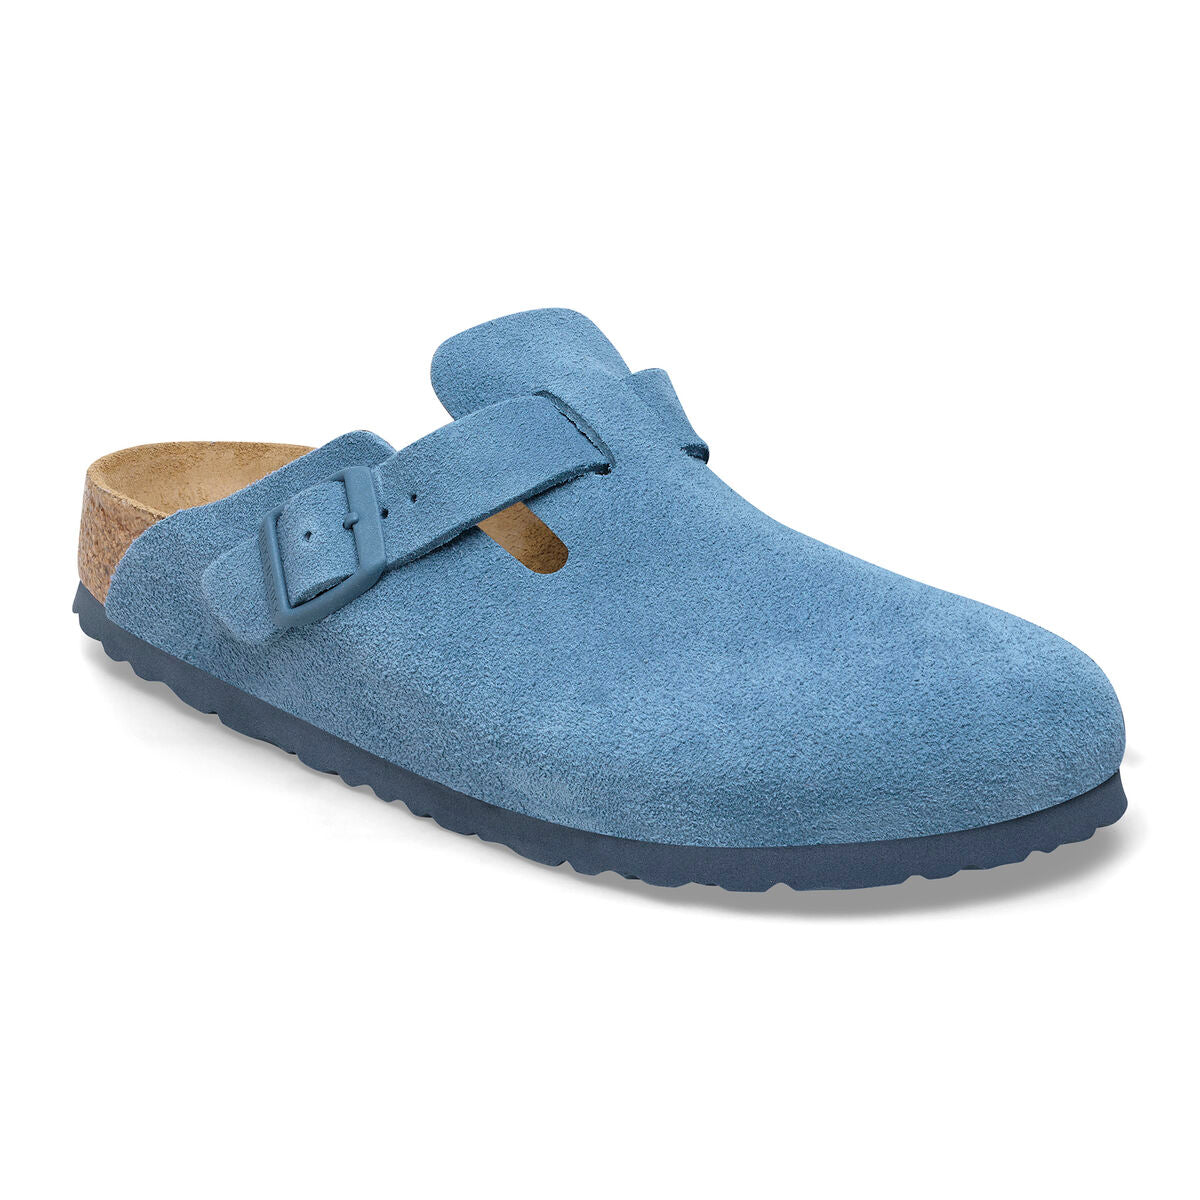 Boston Soft Footbed Suede Leather Narrow Width